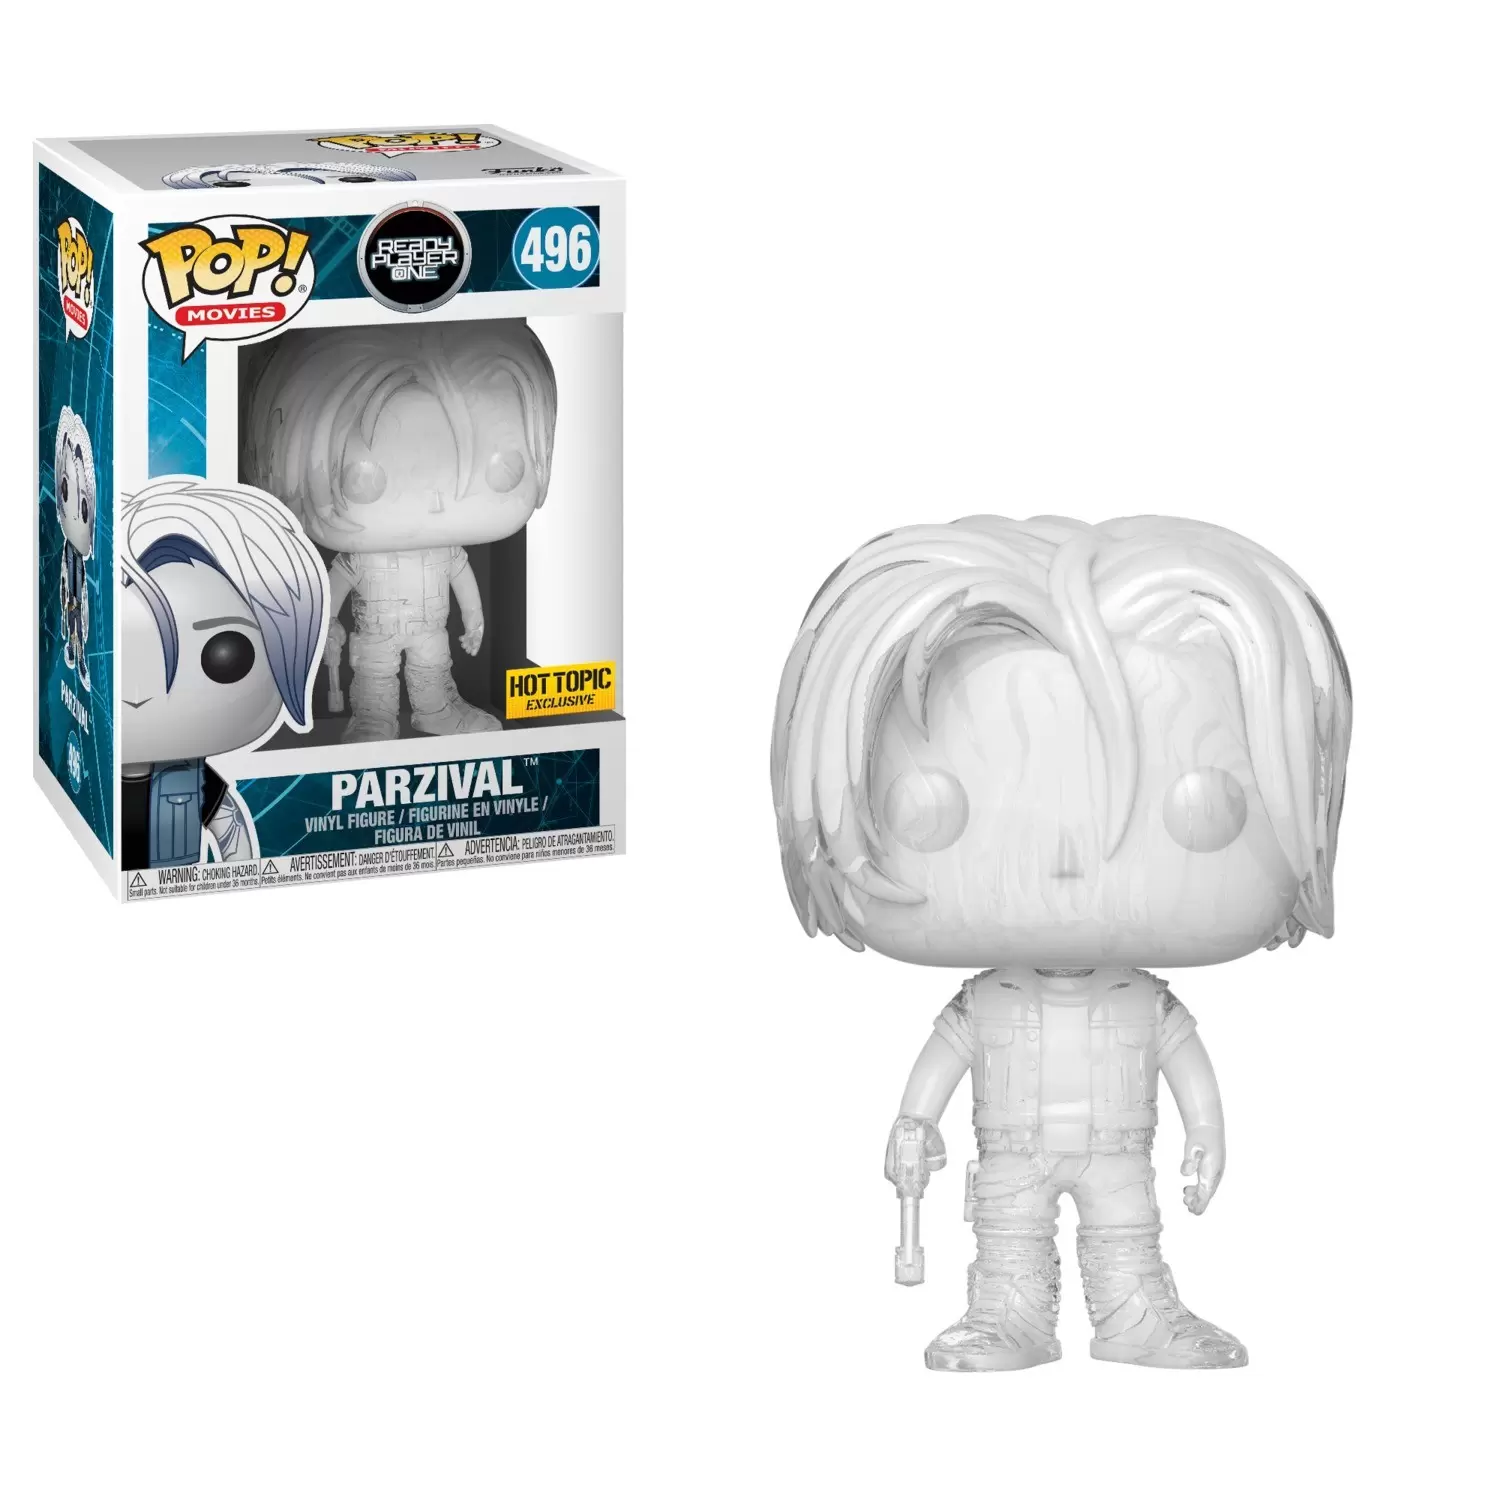 POP! Movies - Ready Player One - Parzival Translucent